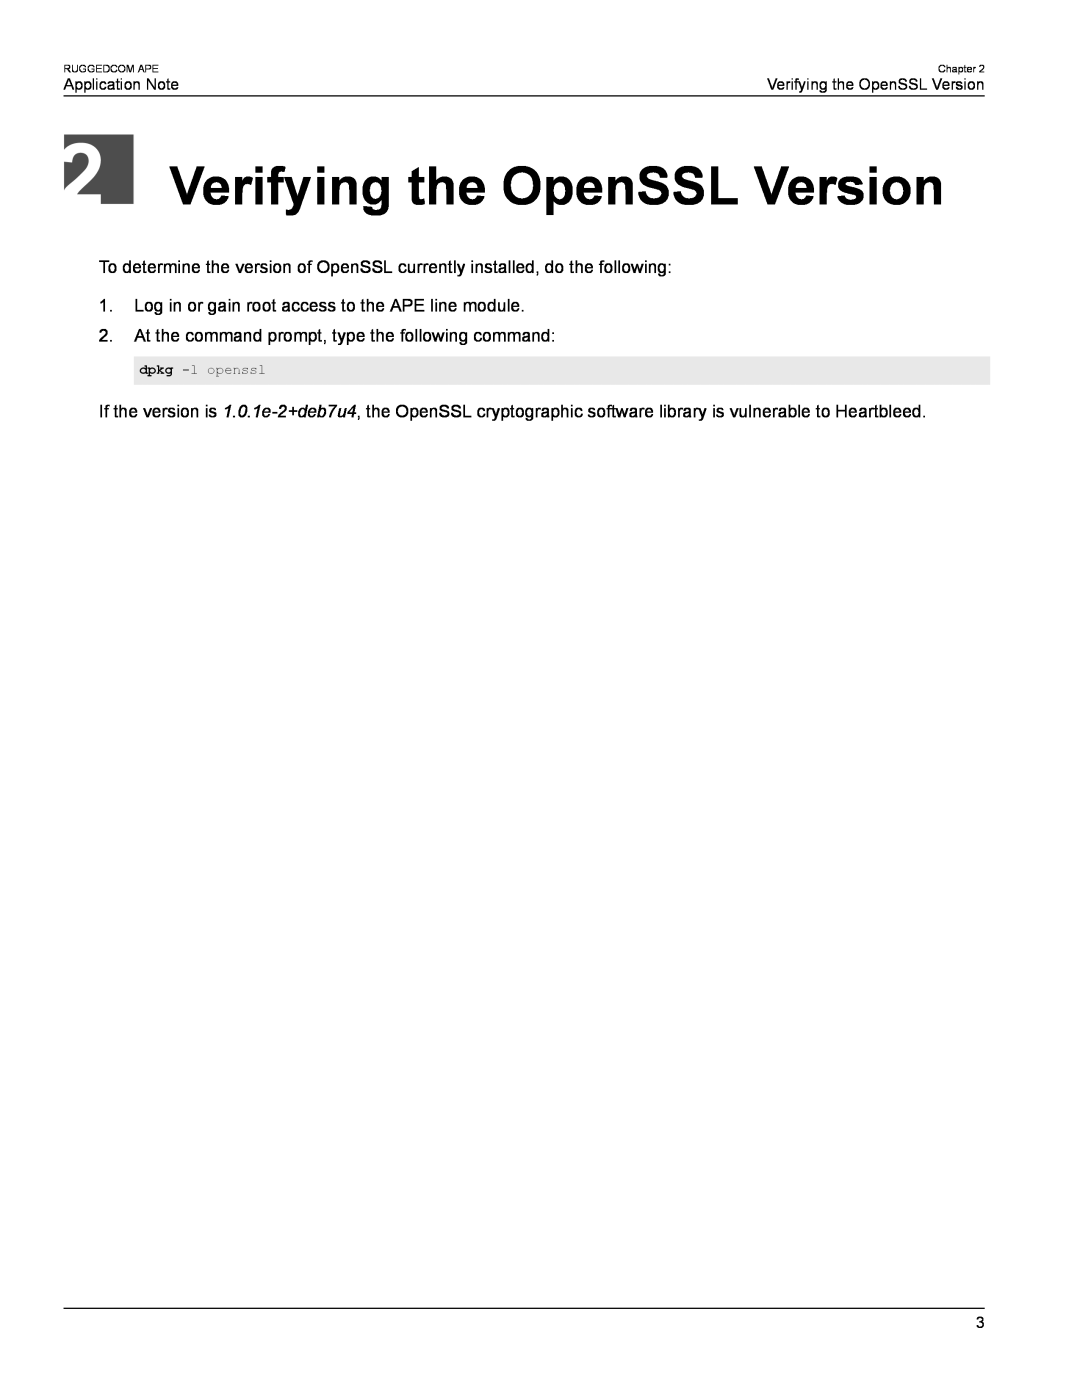 Siemens AN25 manual Verifying the OpenSSL Version, Application Note 